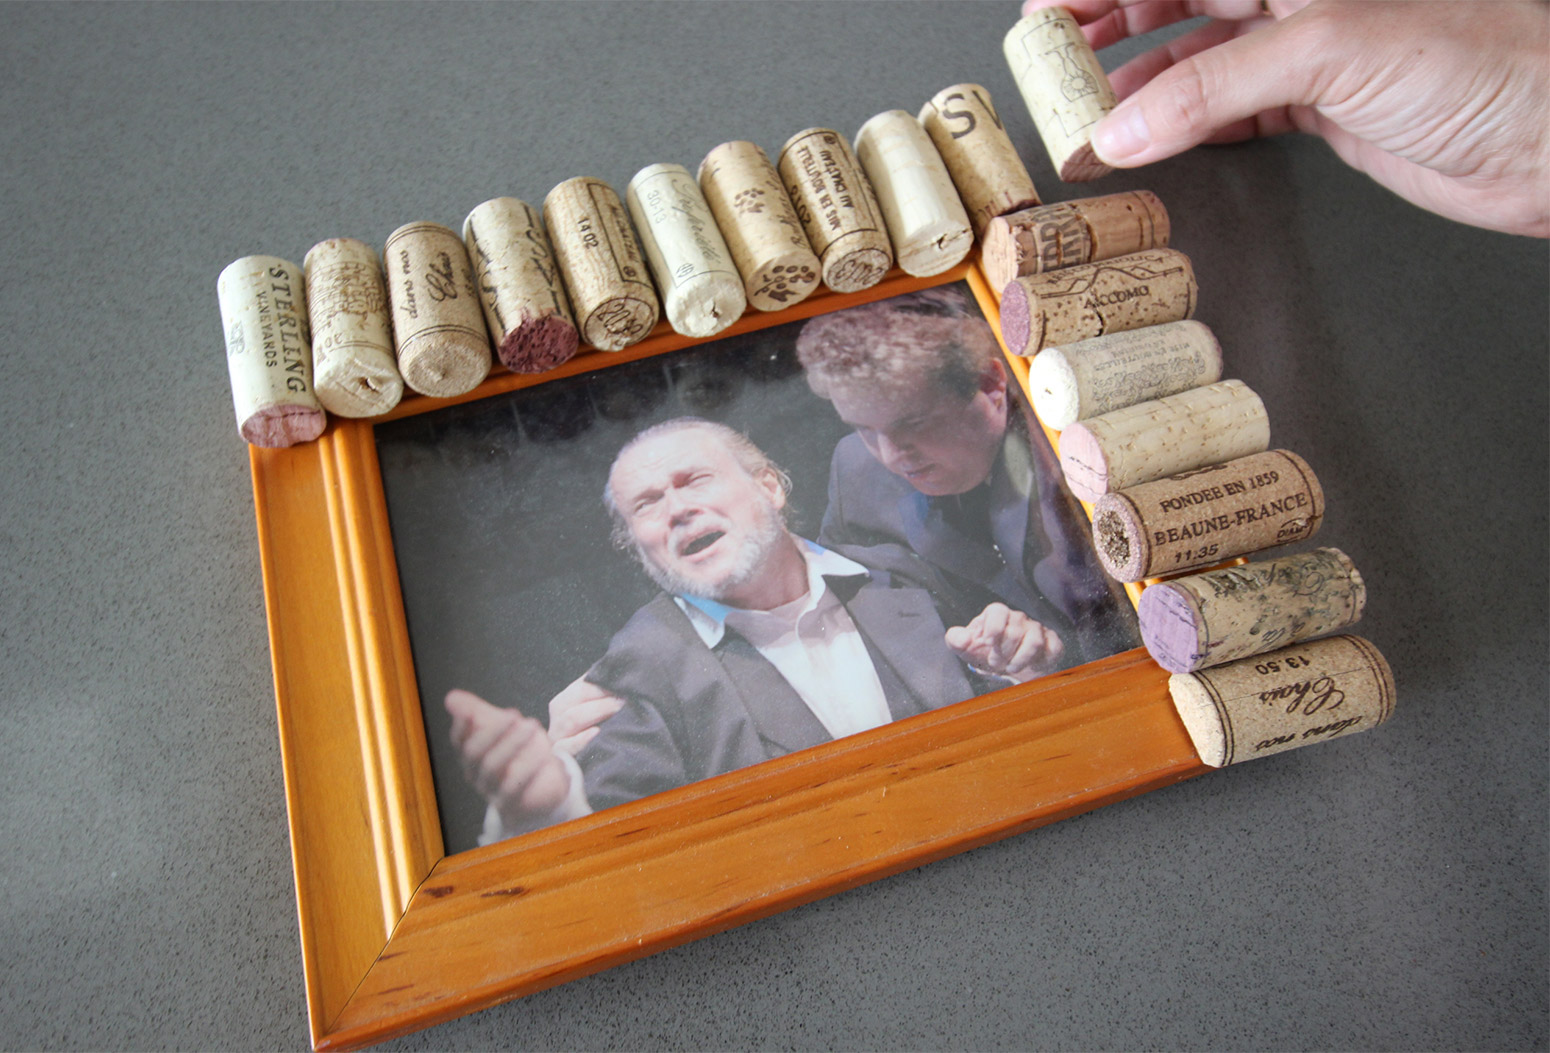 How To Make A Picture Frame Out Of Wine Corks